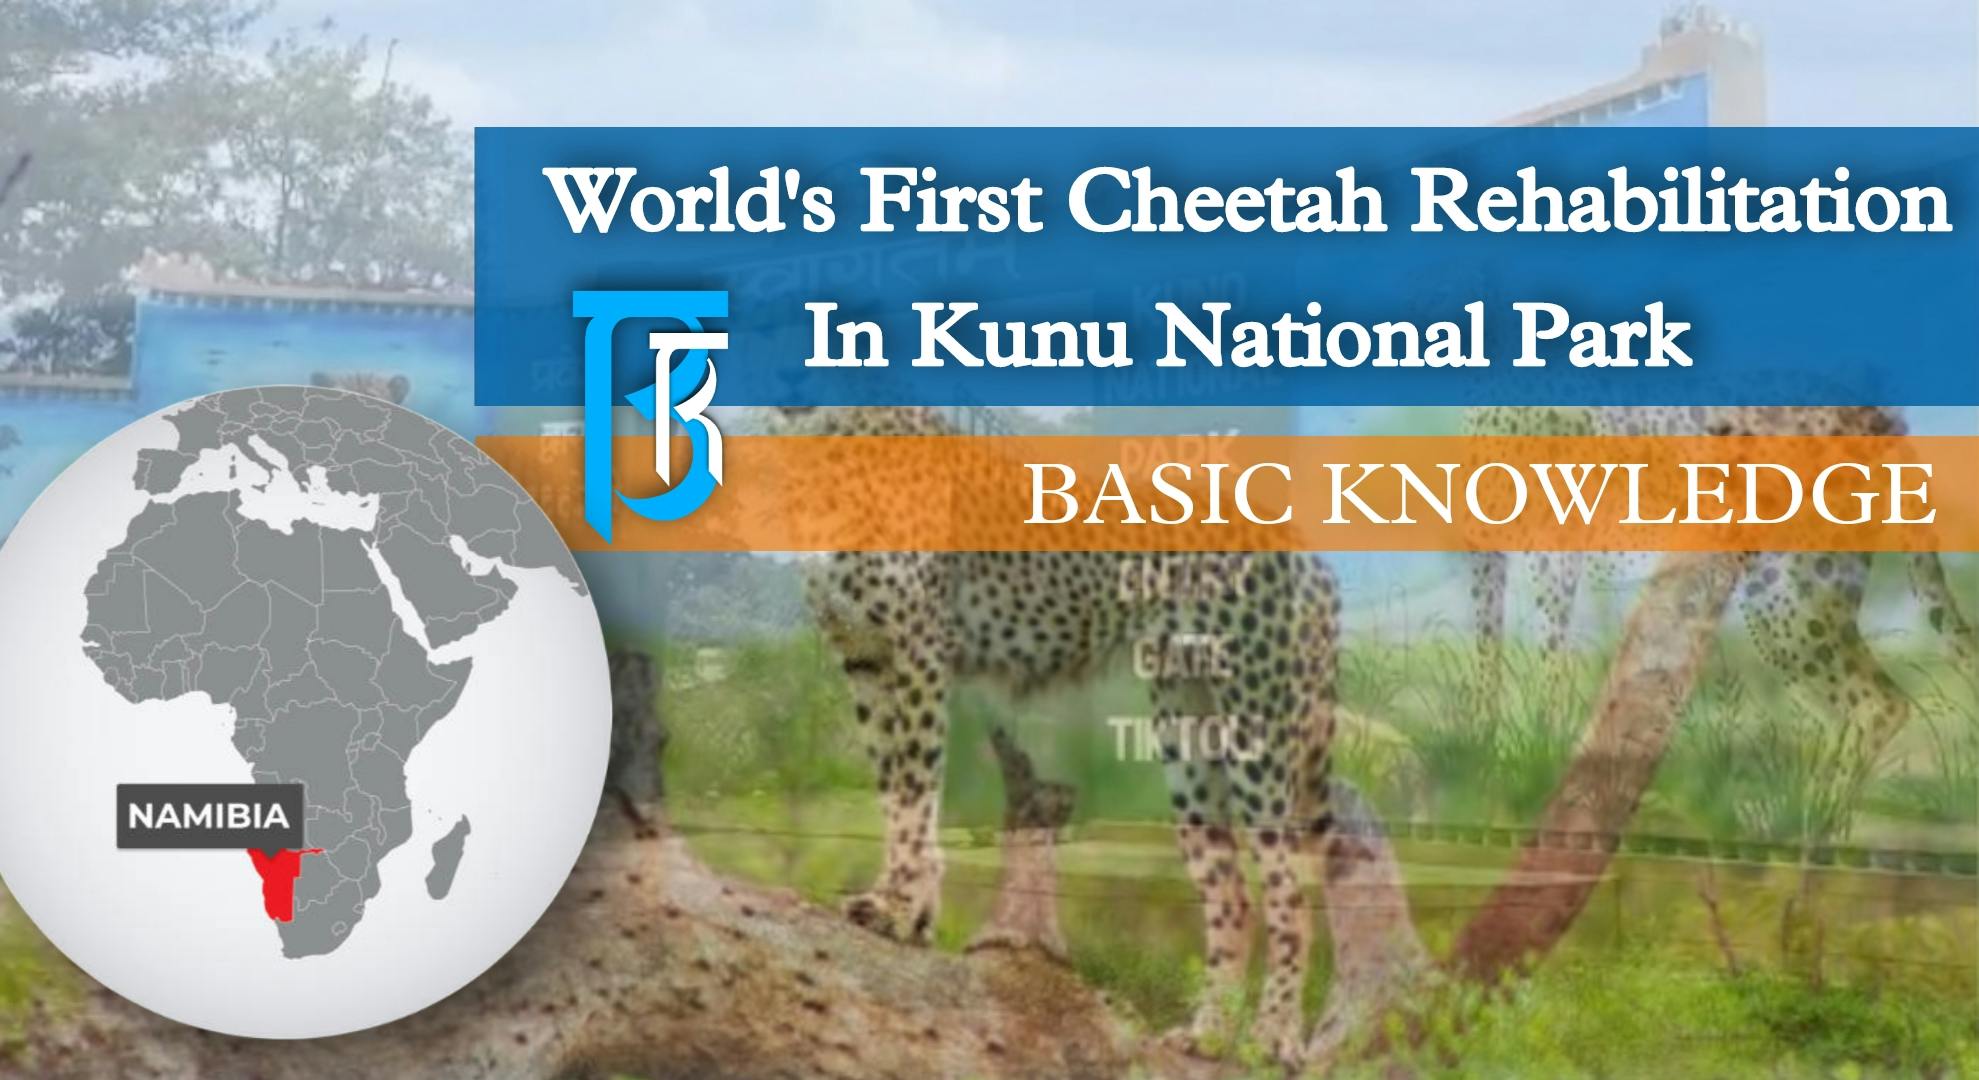 Cover Image for WORLD'S FIRST CHEETAH REHABILITATION PROJECT